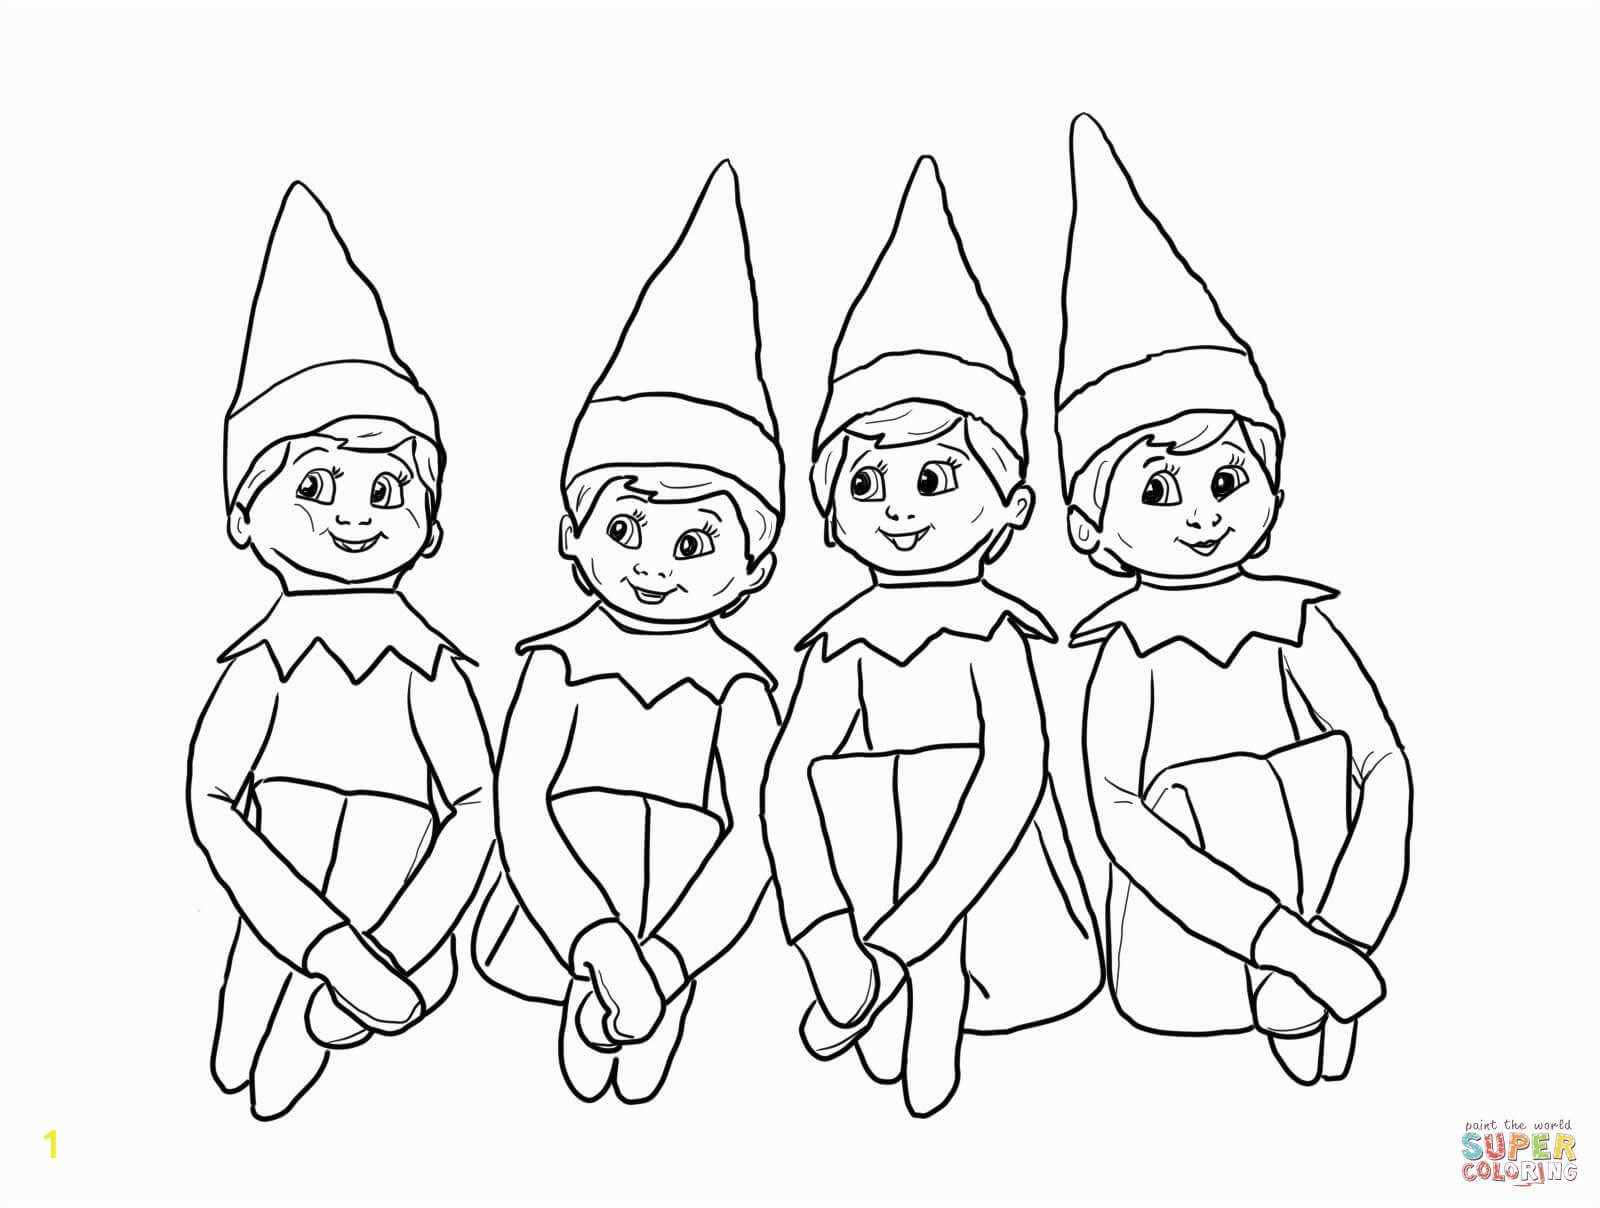 Boy Elf On the Shelf Coloring Pages Printable Girl Elf the Shelf Coloring Pages Coloring Home